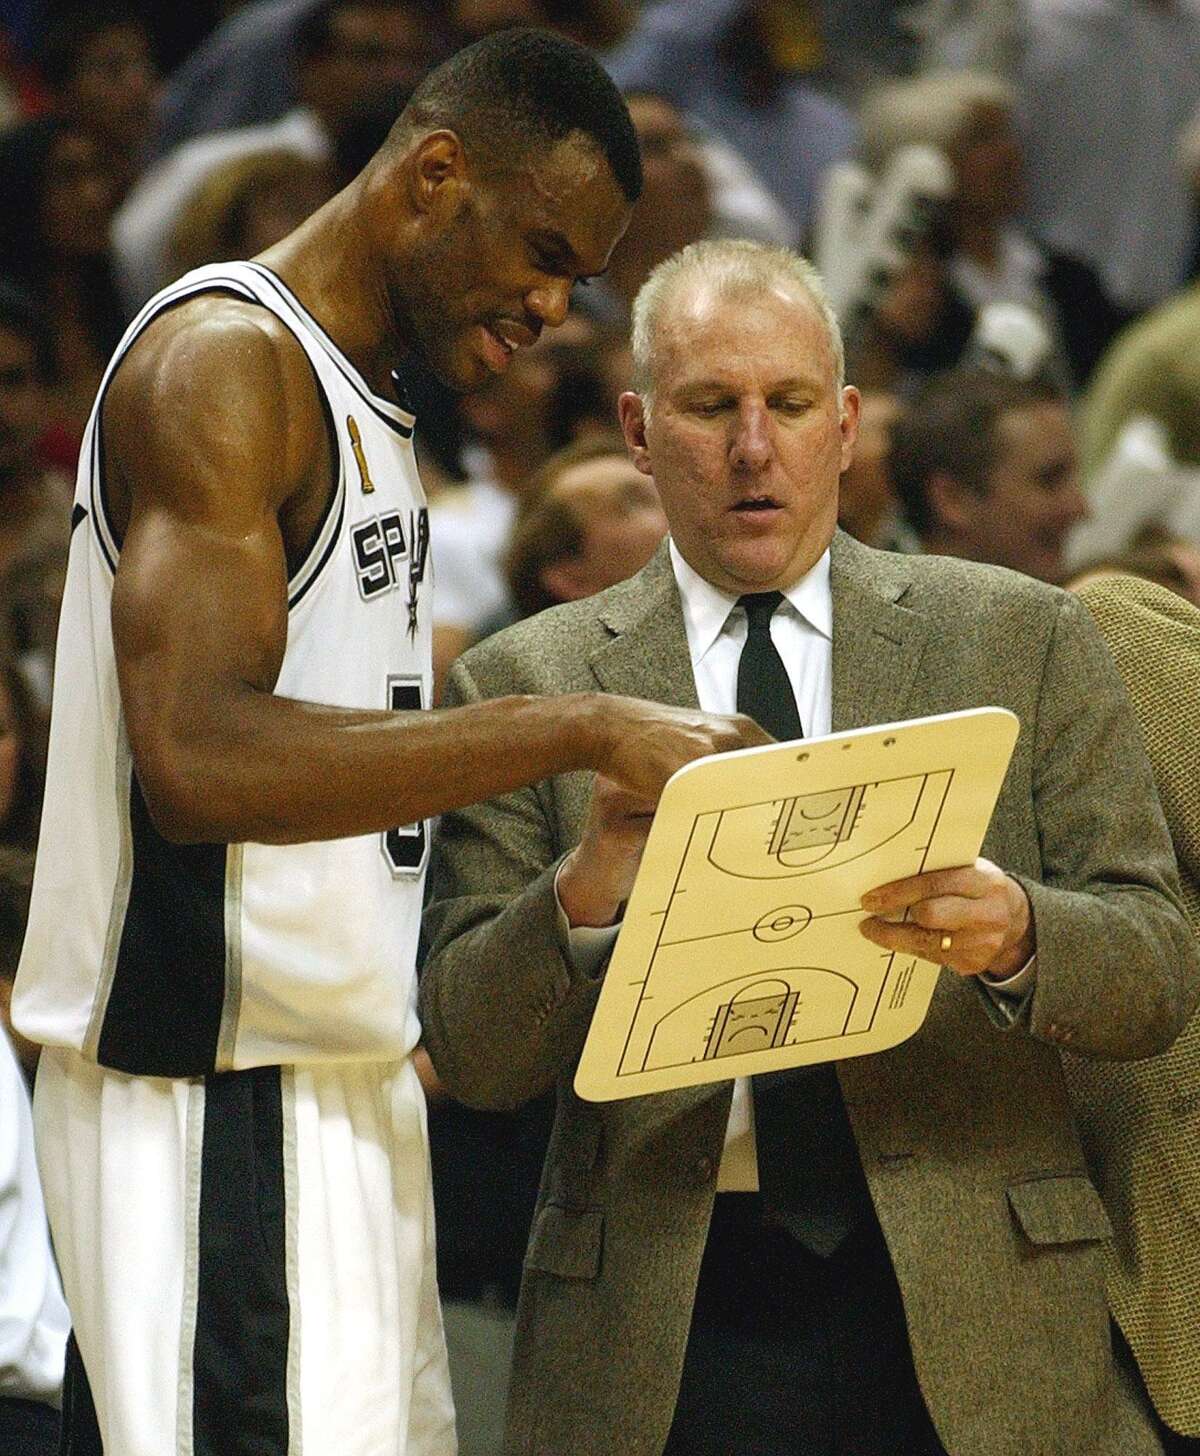 Spurs Coach Gregg Popovich and David Robinson confer during the fourth quarter of game two of the NBA Finals at the SBC Center on Friday, June 6, 2003. ( JERRY LARA STAFF )